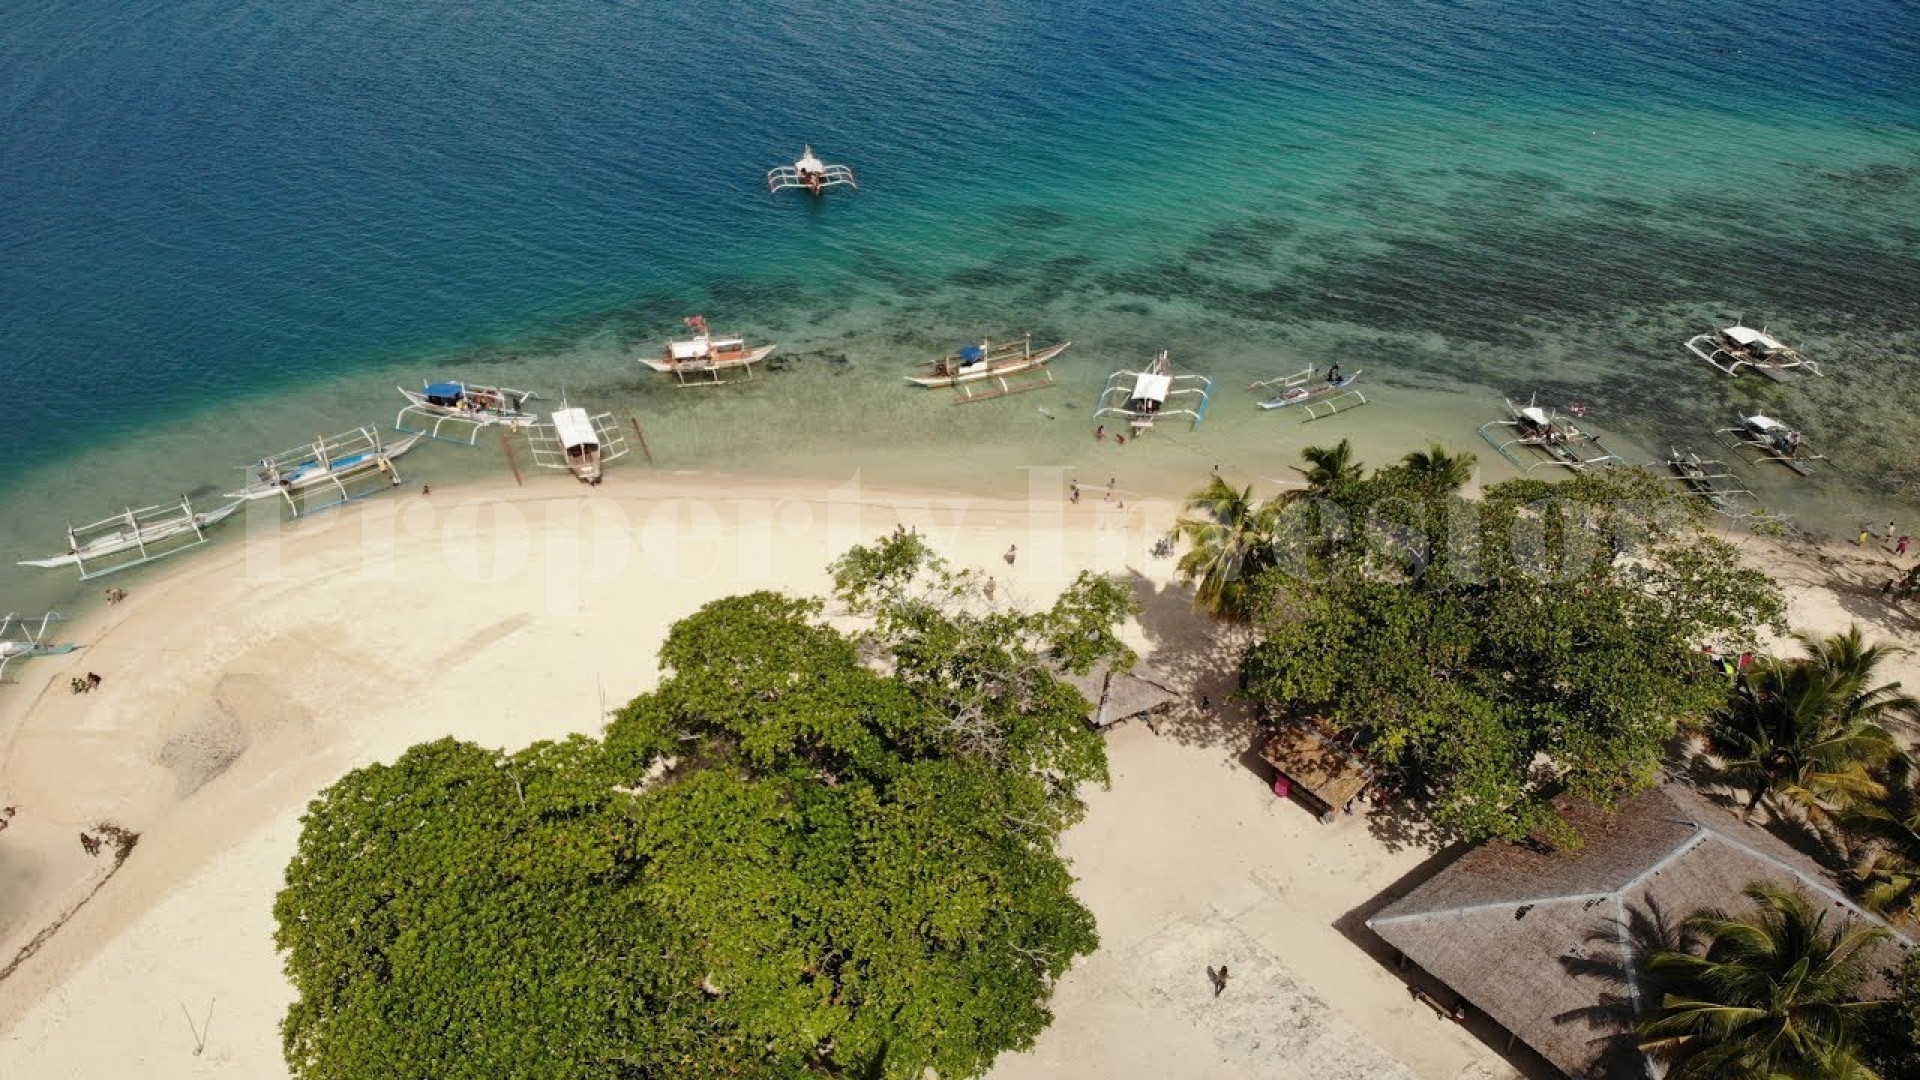 Picture Perfect 5.7 Hectare Private Island for Sale in Palawan, Philippines